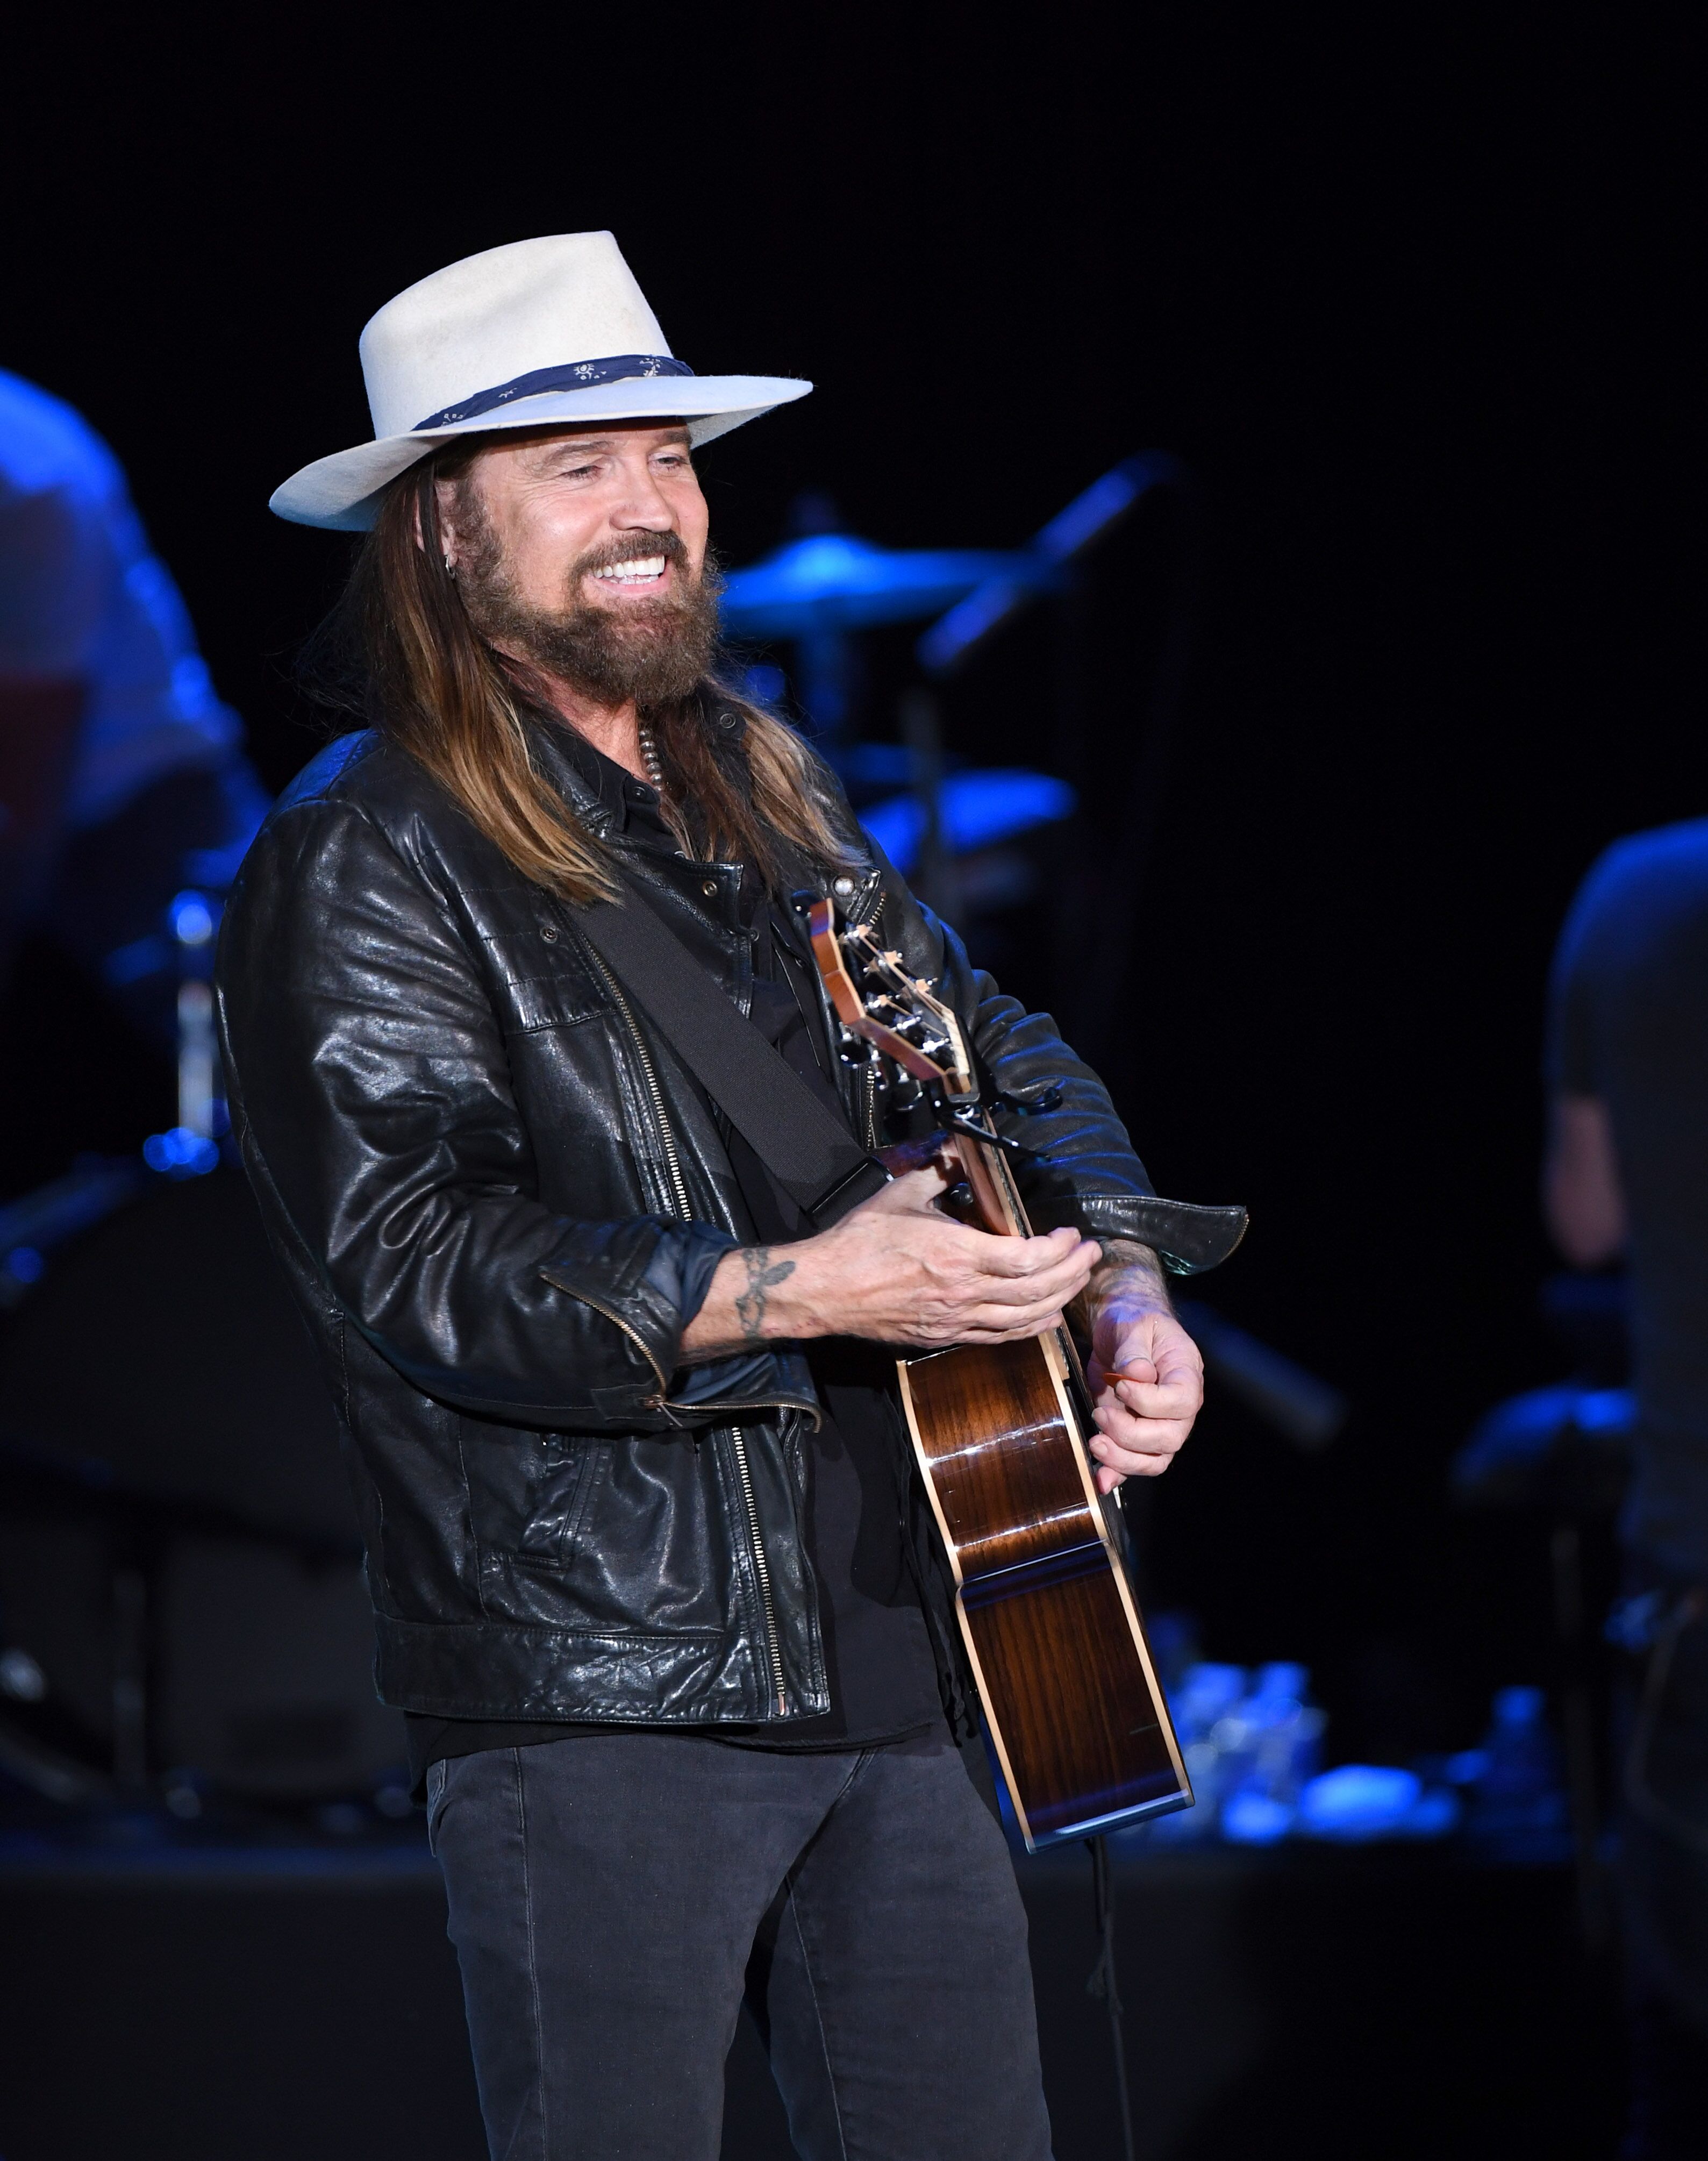 Billy Ray Cyrus kicks-off his five-show residency "Billy Ray Cyrus - The Residency" at The Orleans Showroom on May 7, 2019, in Las Vegas, Nevada | Photo: Getty Images